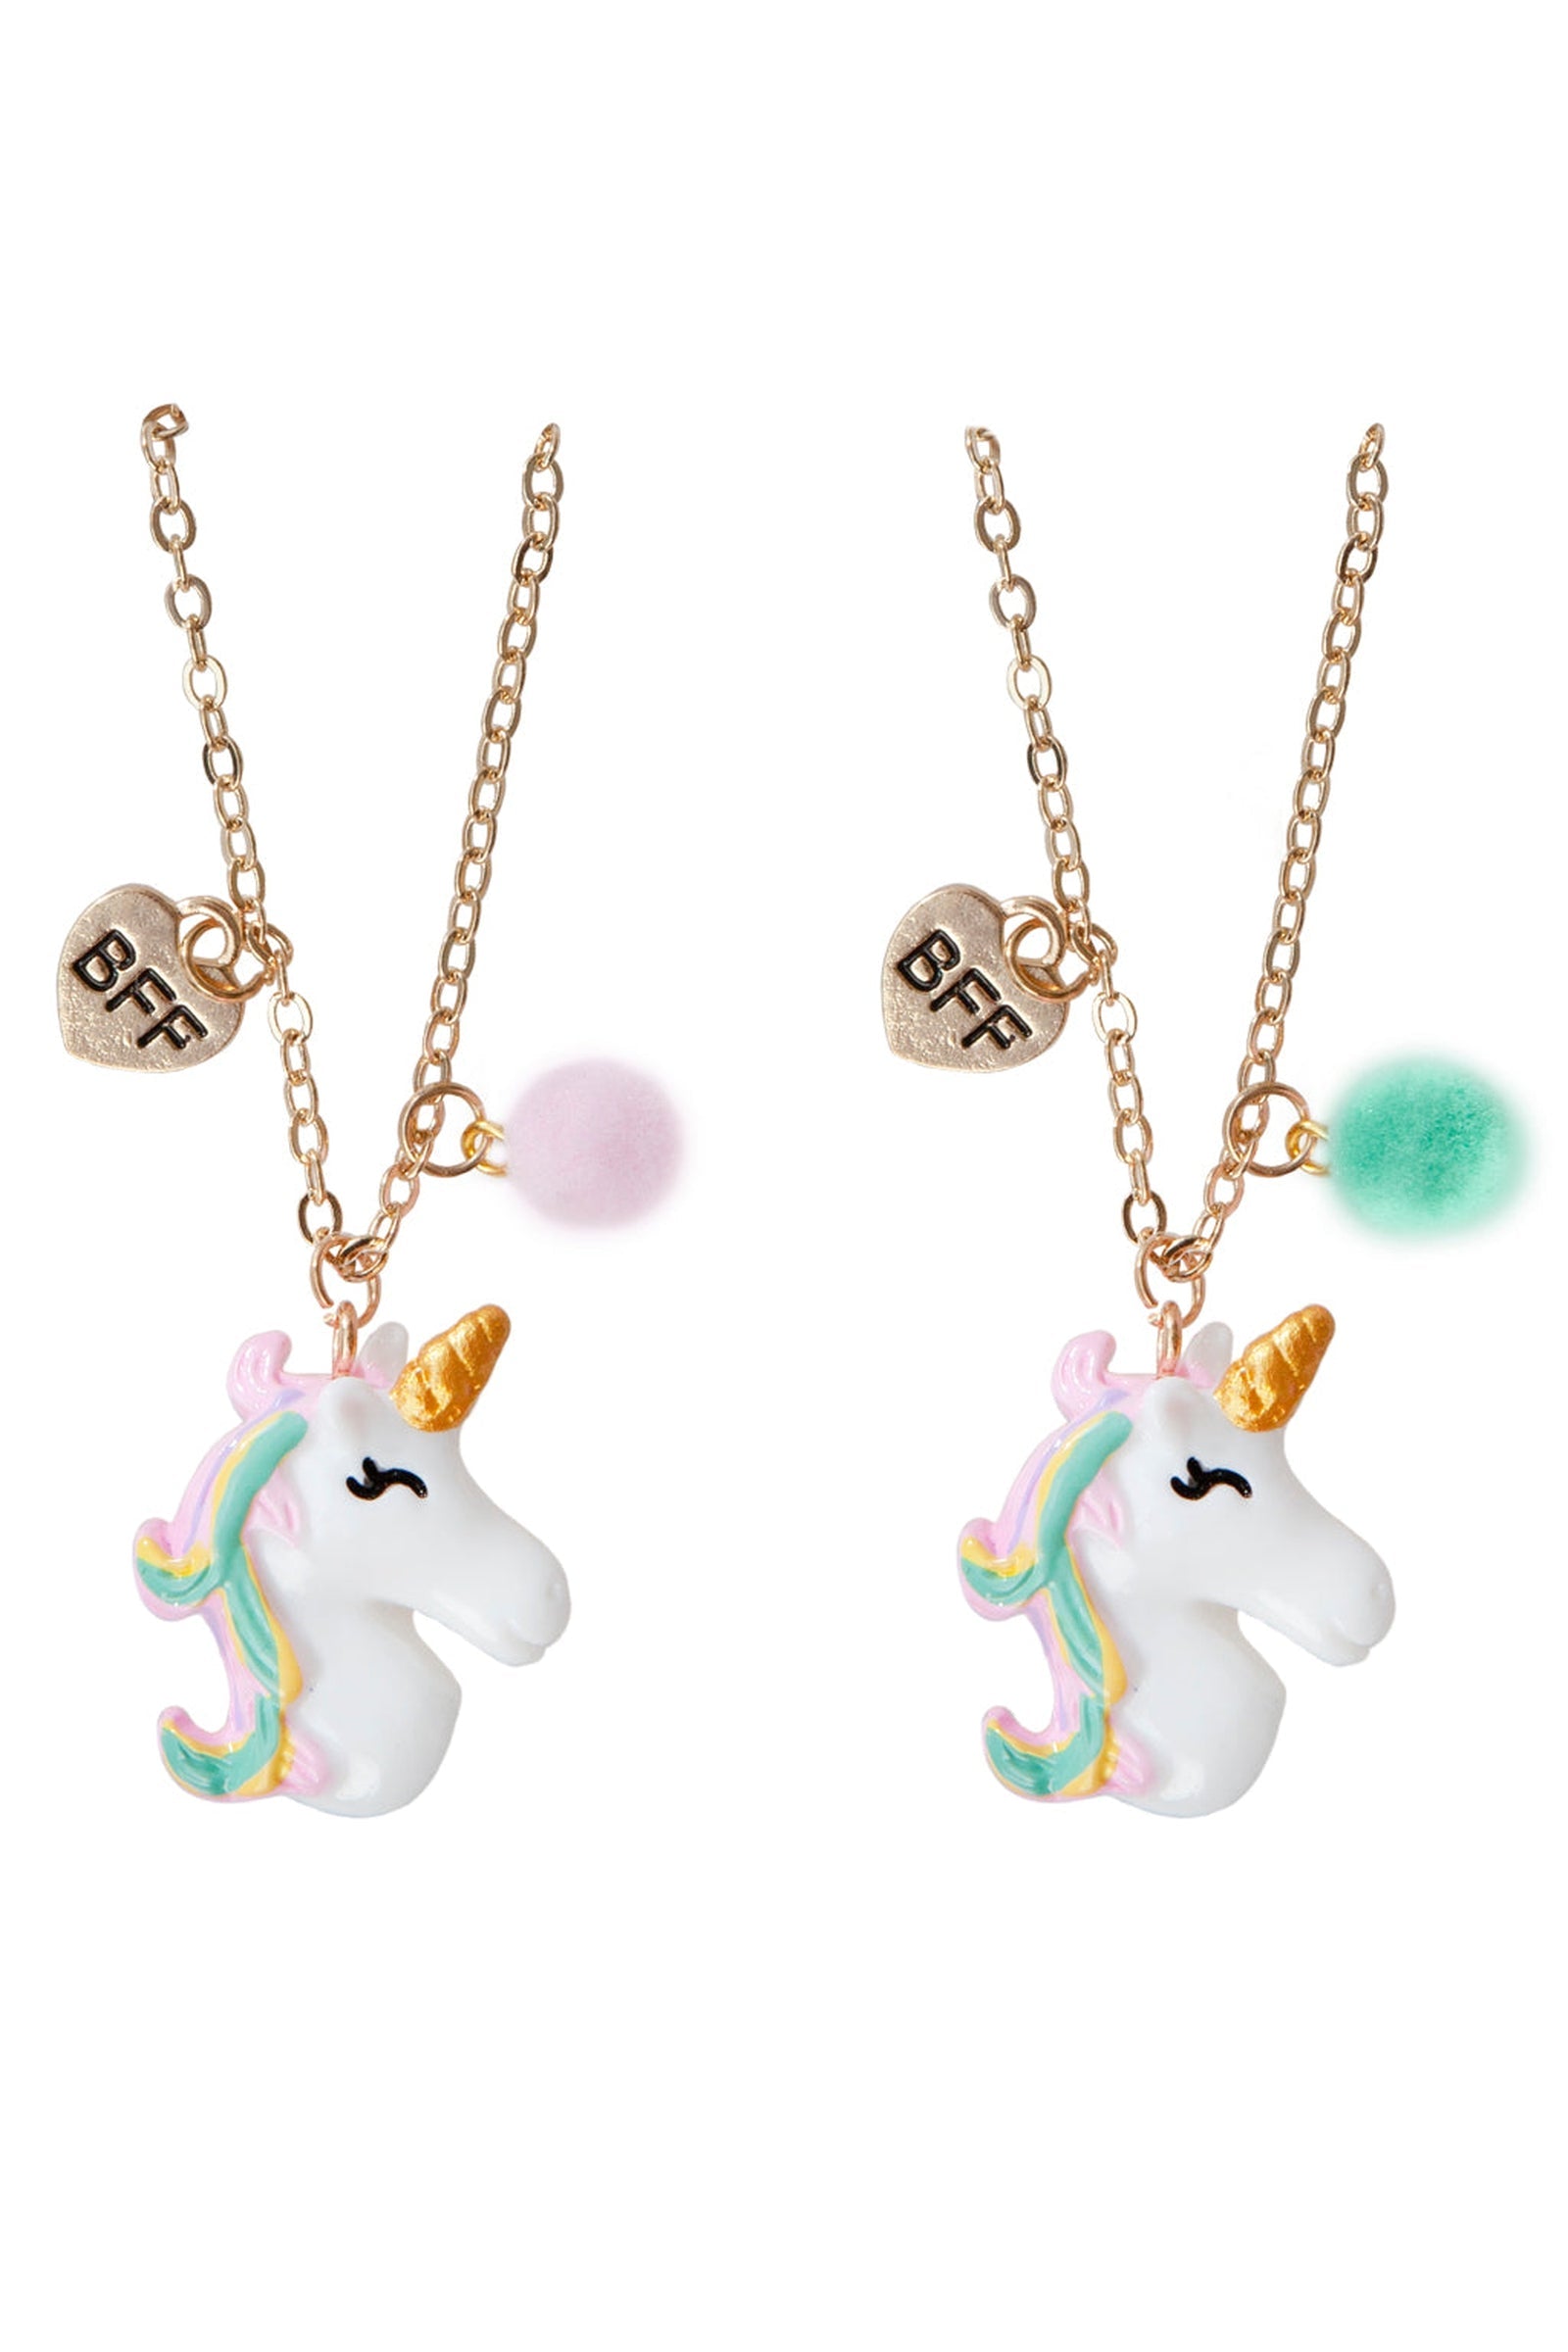 Unicorn BFF Necklace Set by Great Pretenders #86111